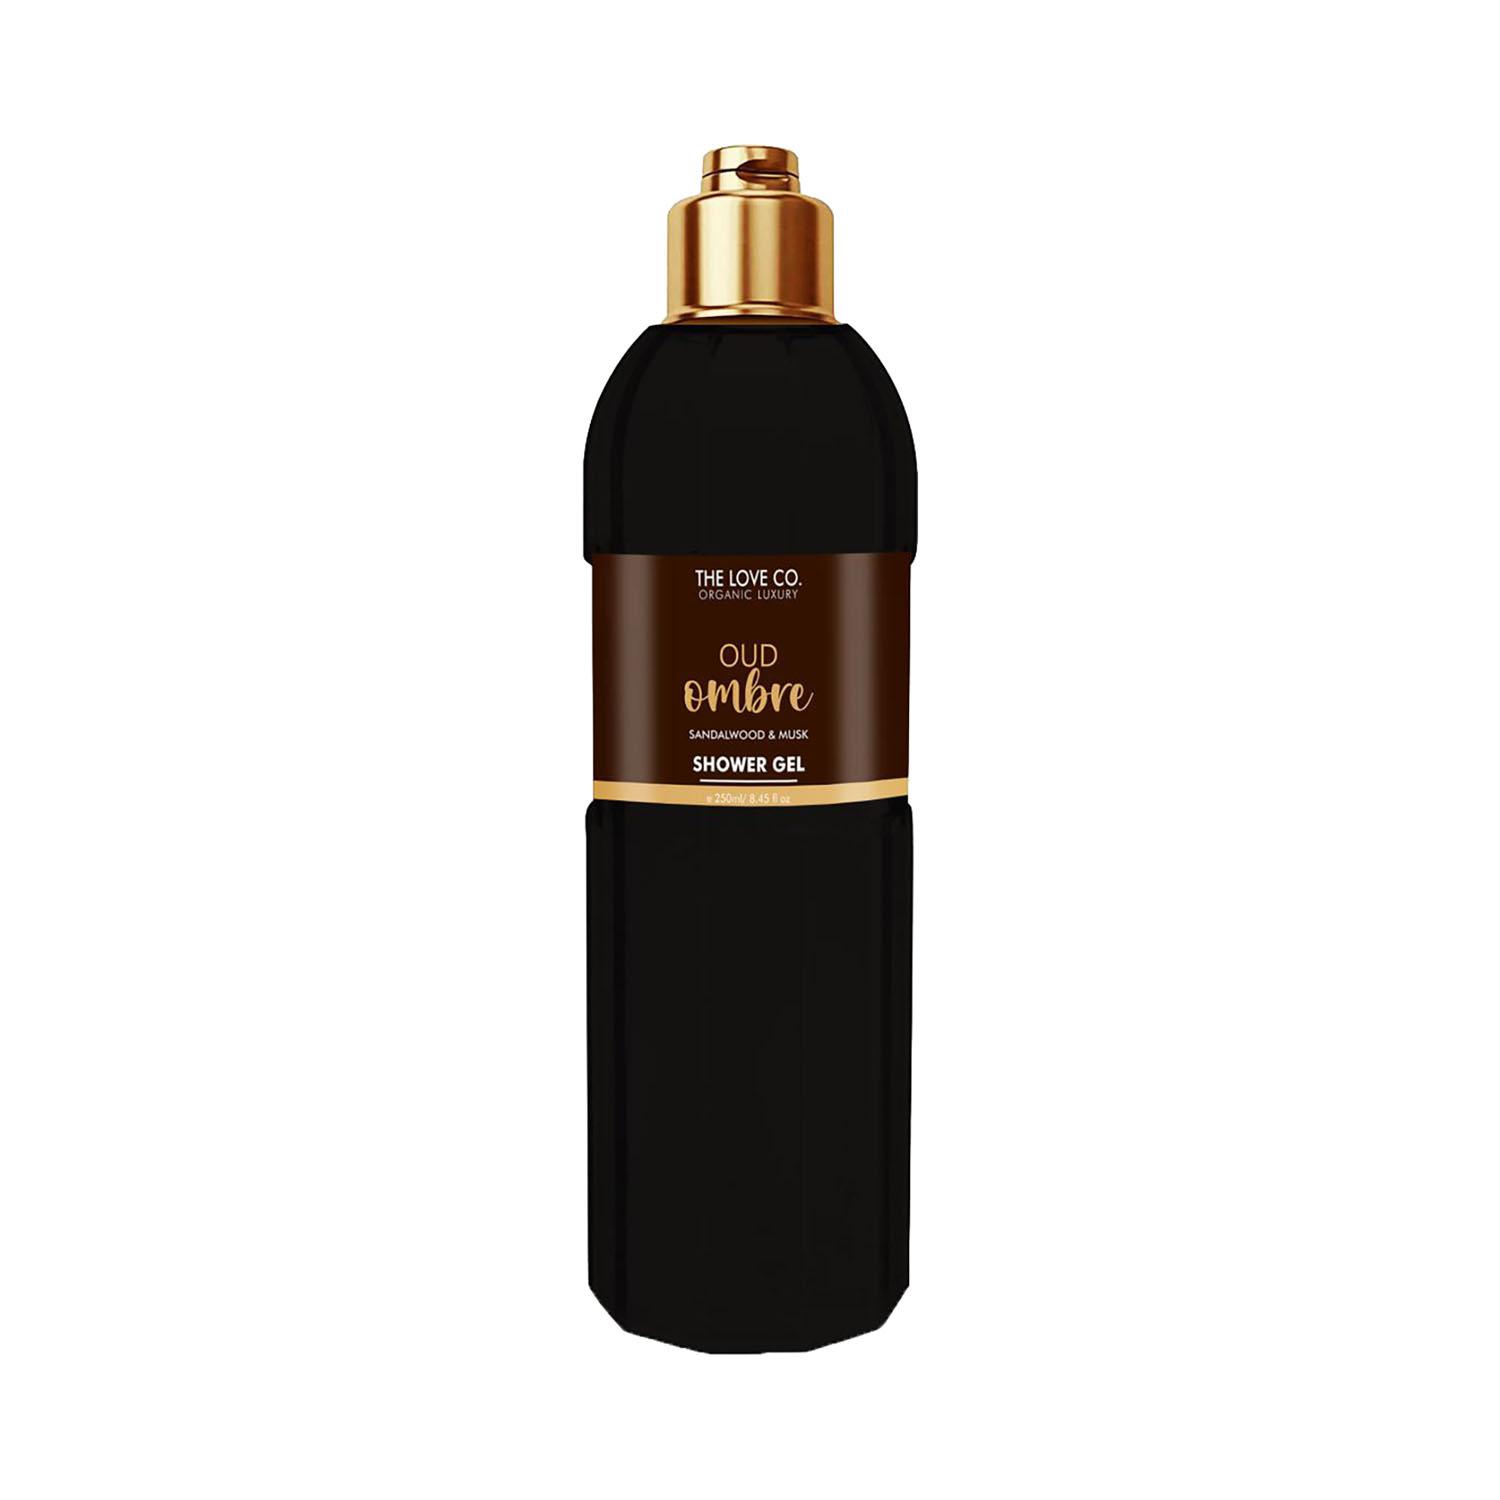 THE LOVE CO. | THE LOVE CO. Oud Ombre Shower Gel (250ml)